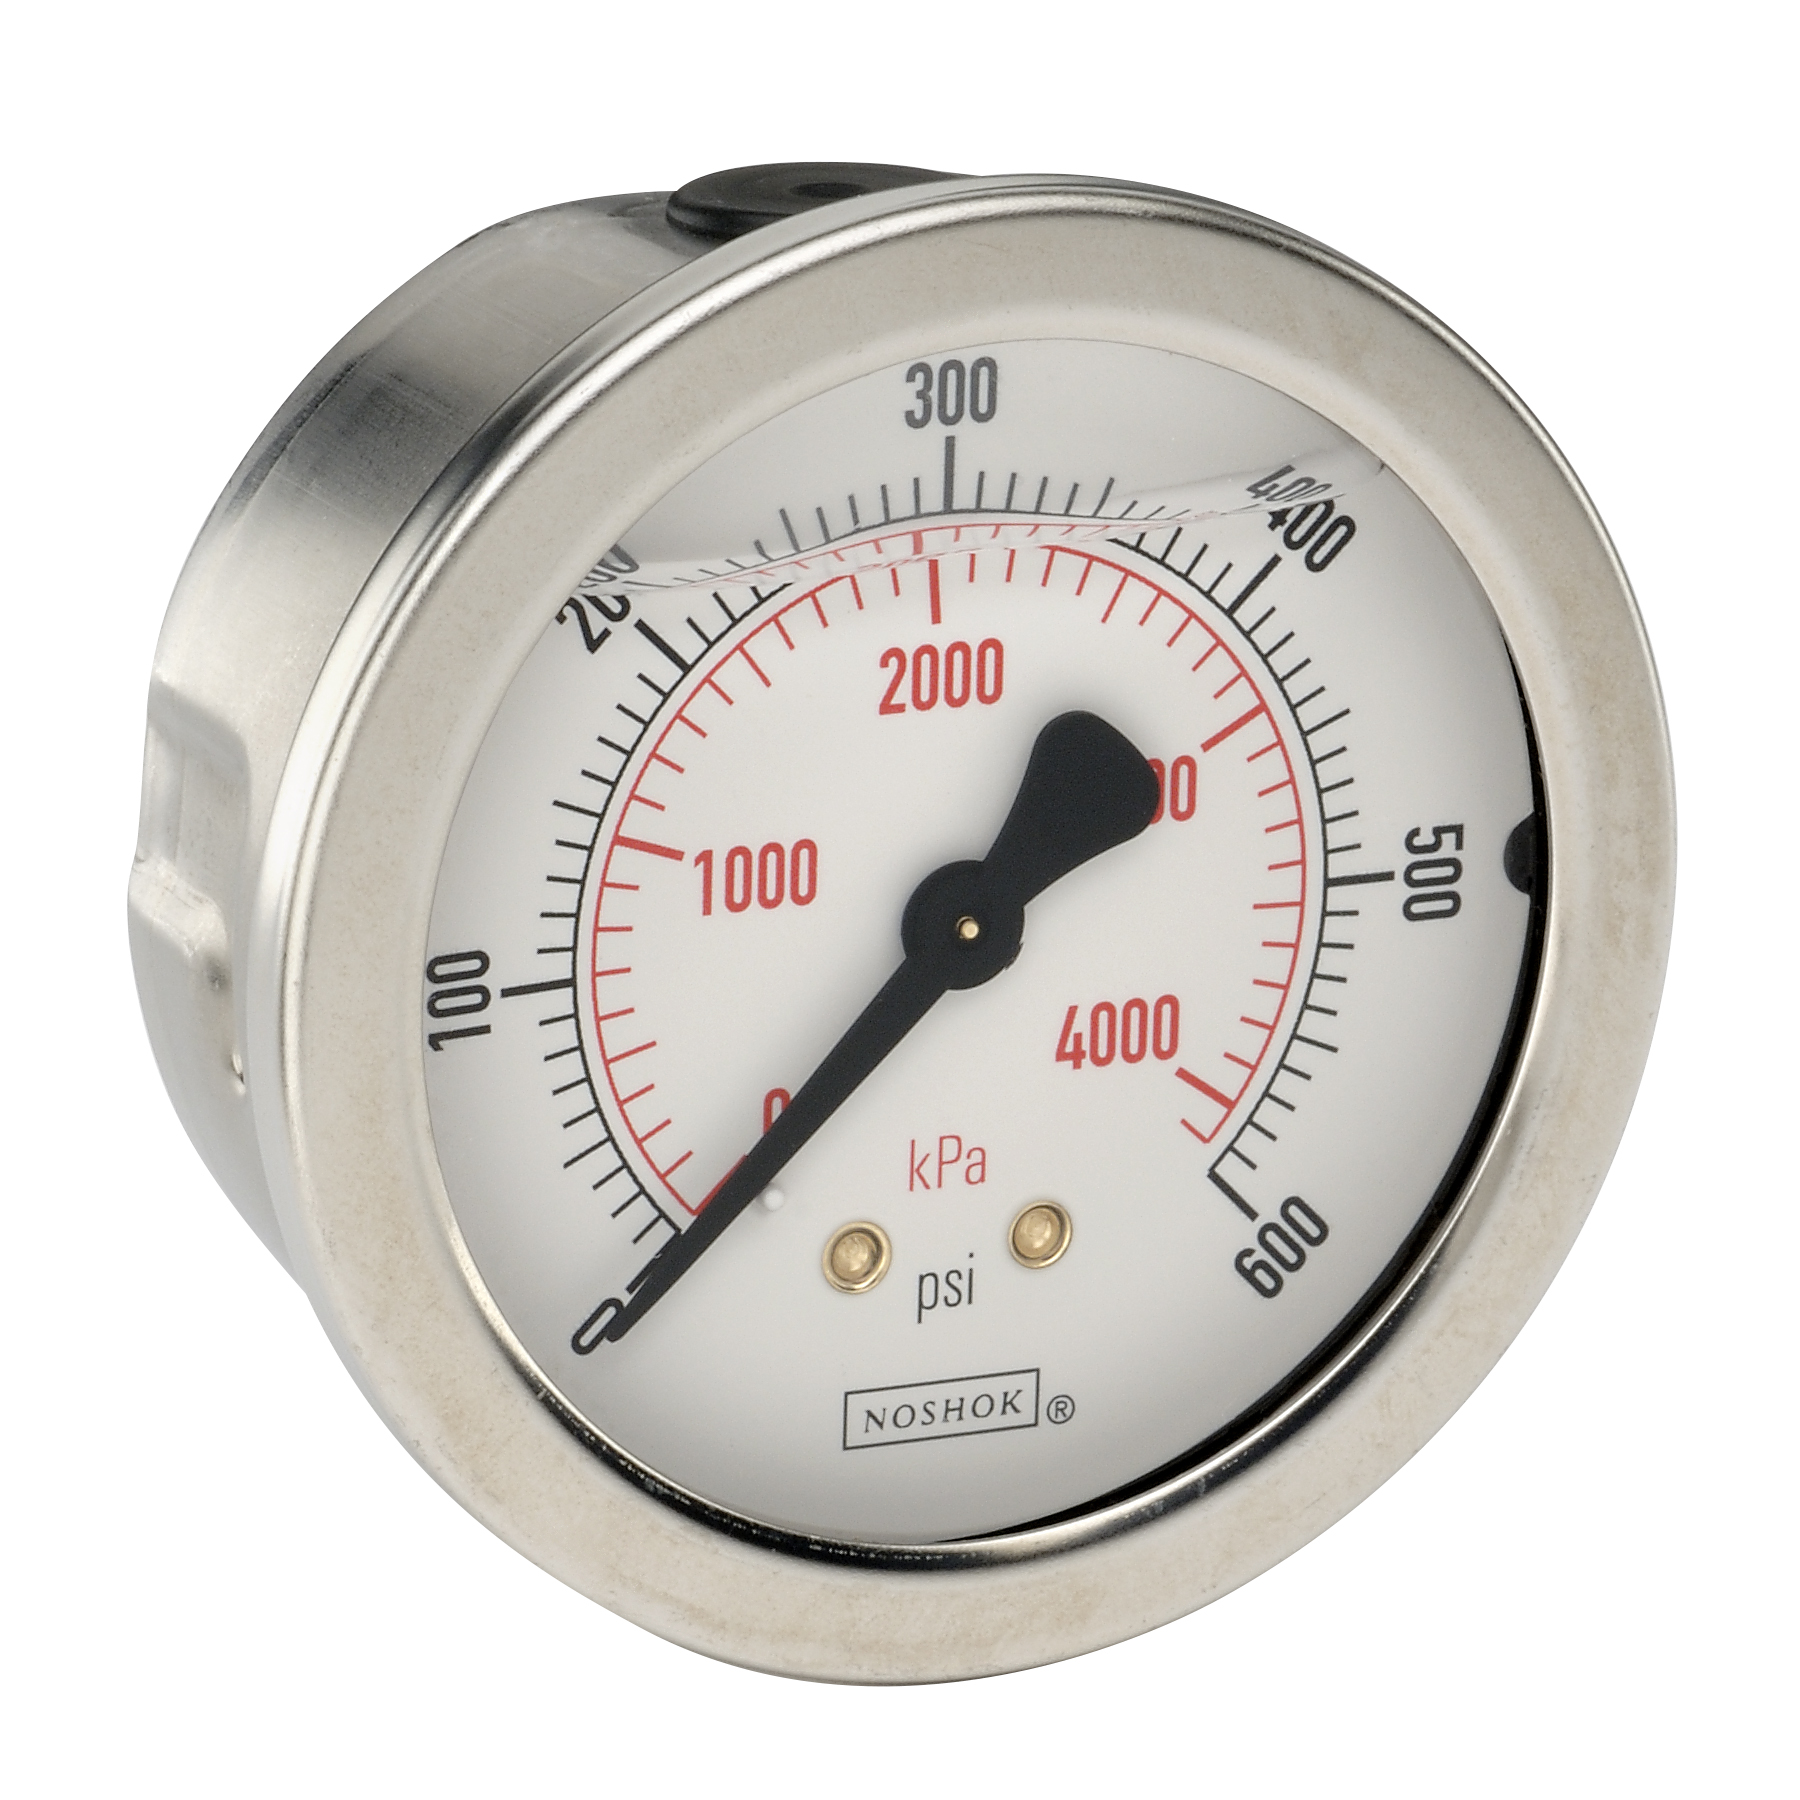 25-911-SST-600-psi/kPa-PMC 900 Series ABS and Stainless Steel Liquid Filled Pressure Gauges